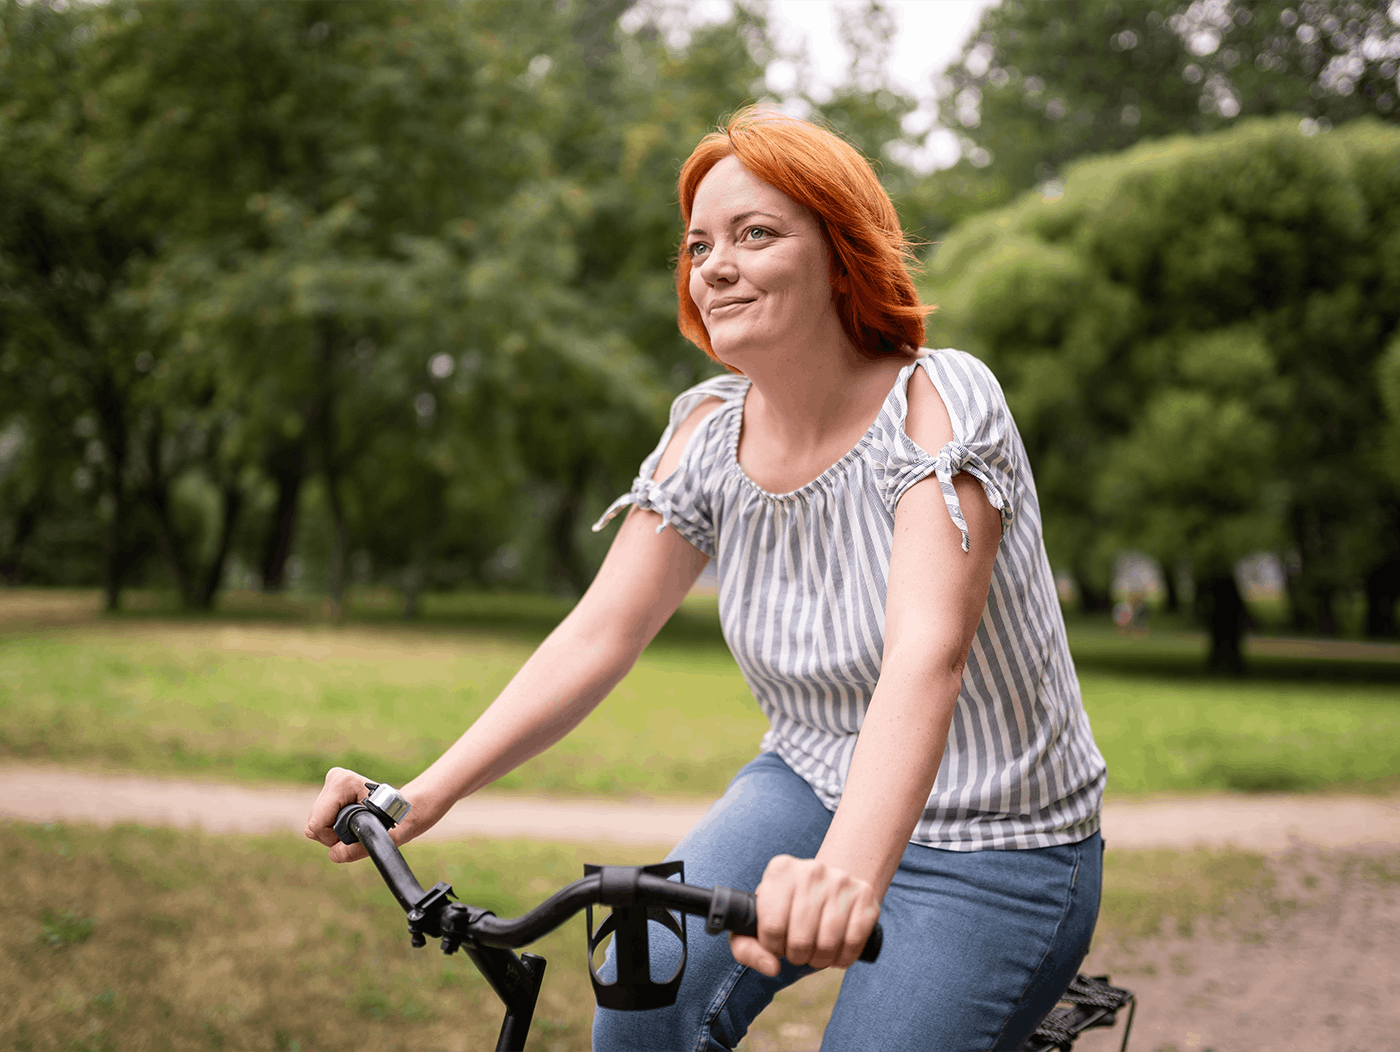 A caucasian woman with orange hair riding a bicycle in the park.